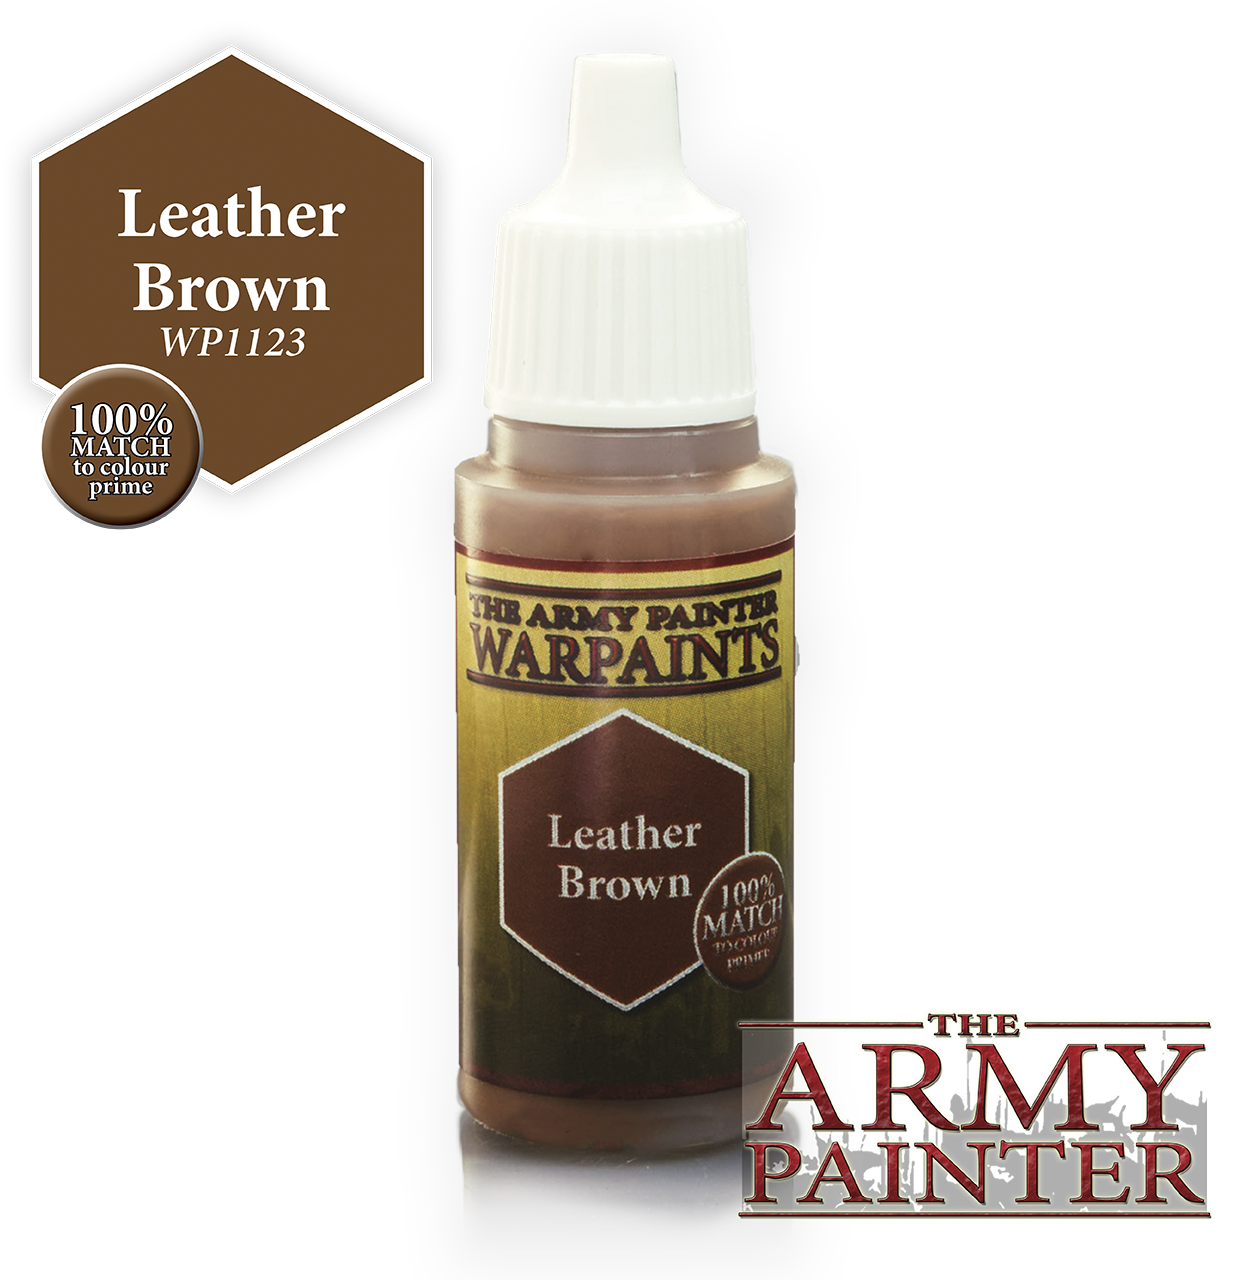 The ARMY PAINTER: Acrylics Warpaint - Leather Brown | Tacoma Games